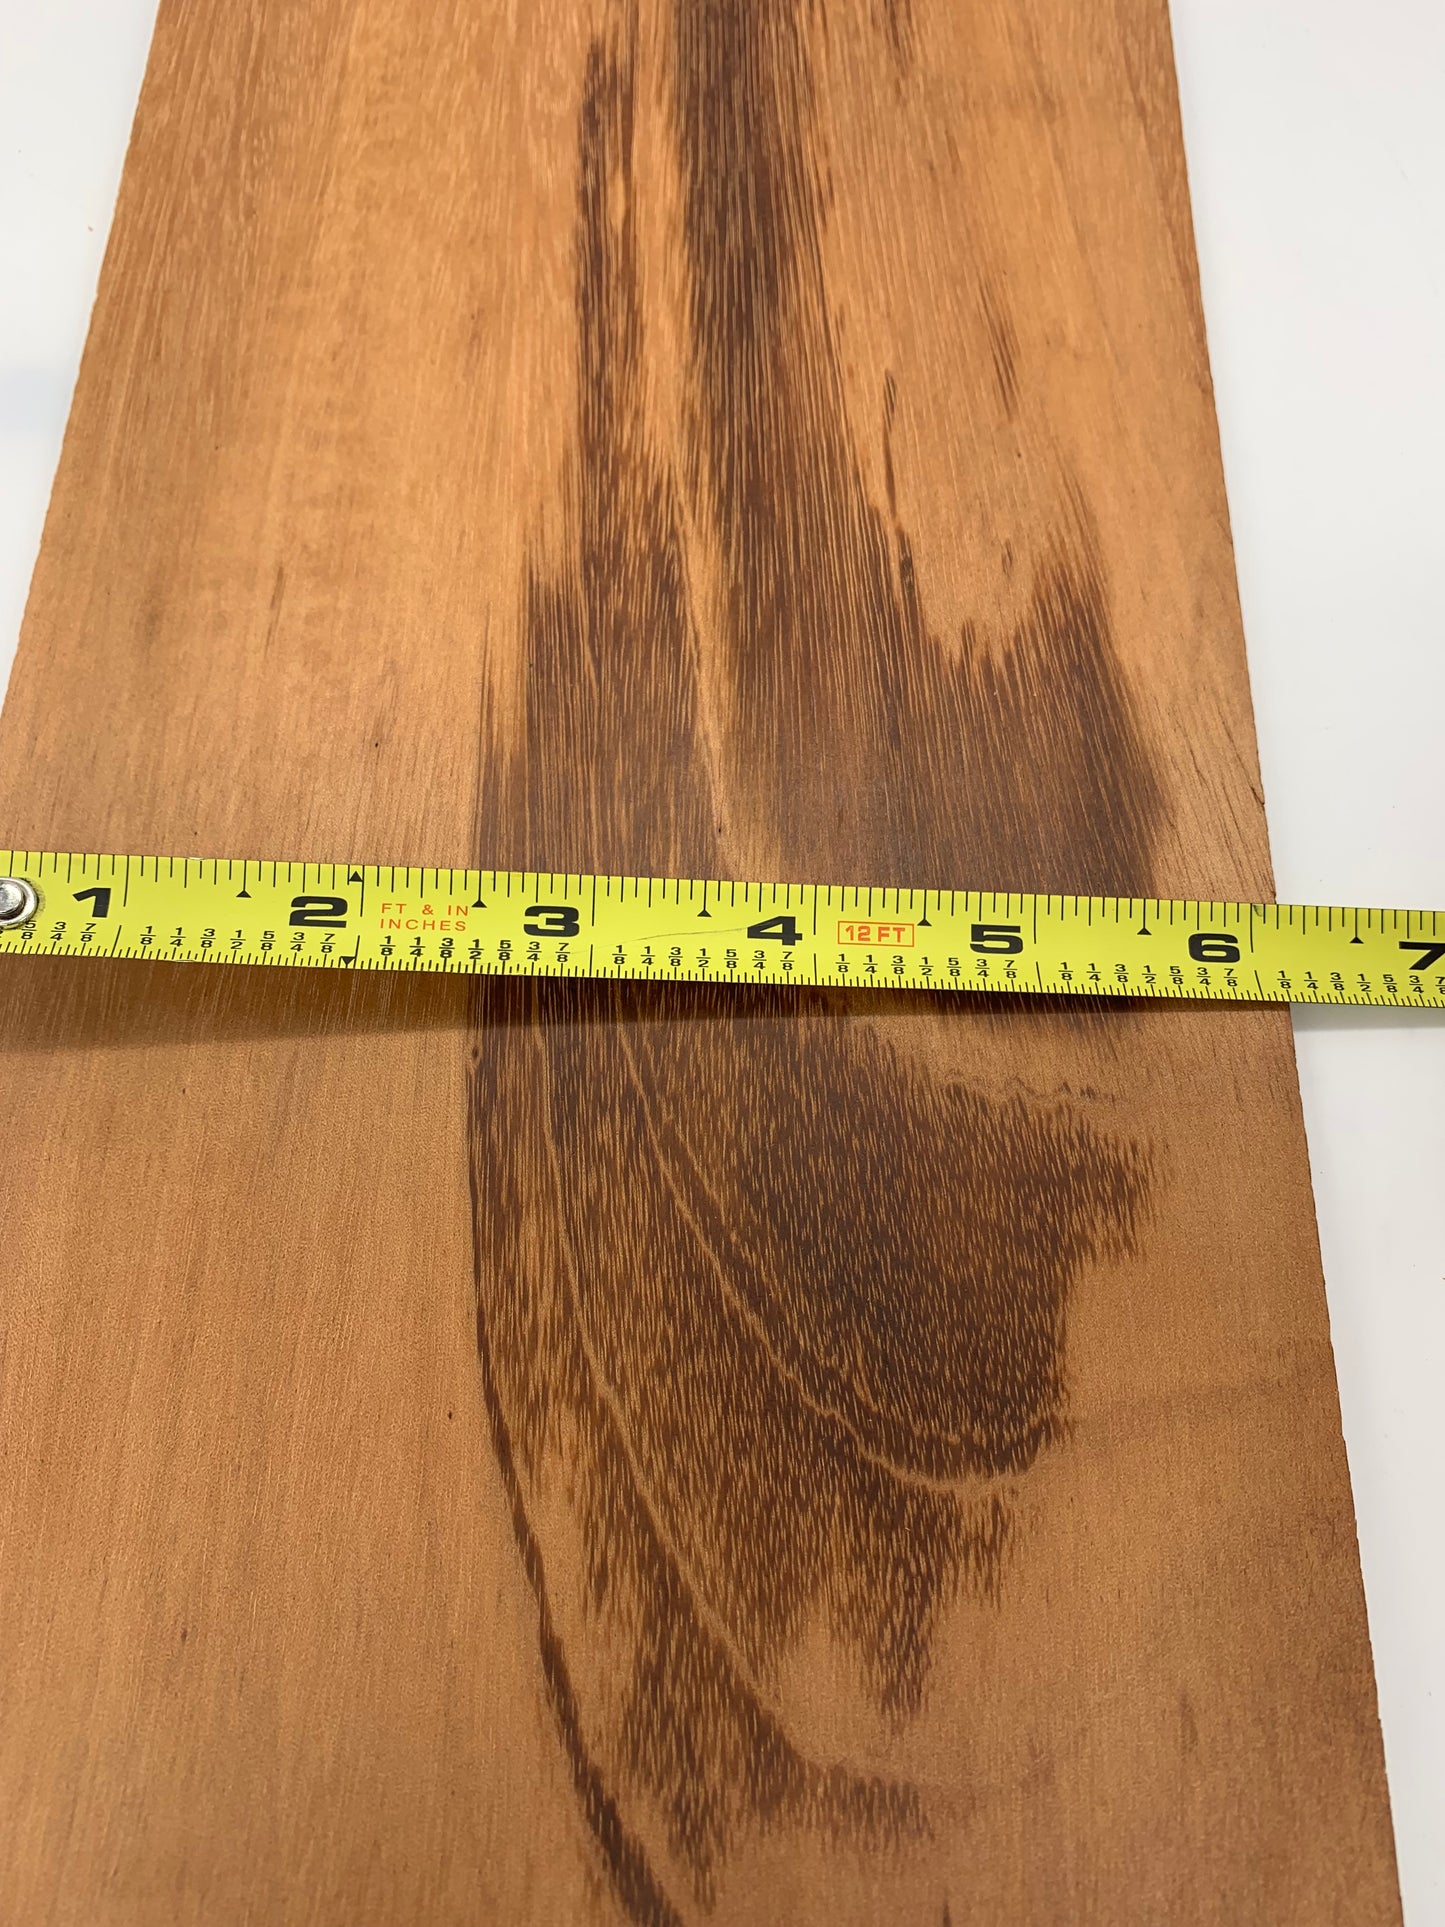 Tigerwood Hardwood, 1/8 thick, perfect for laser cutting.